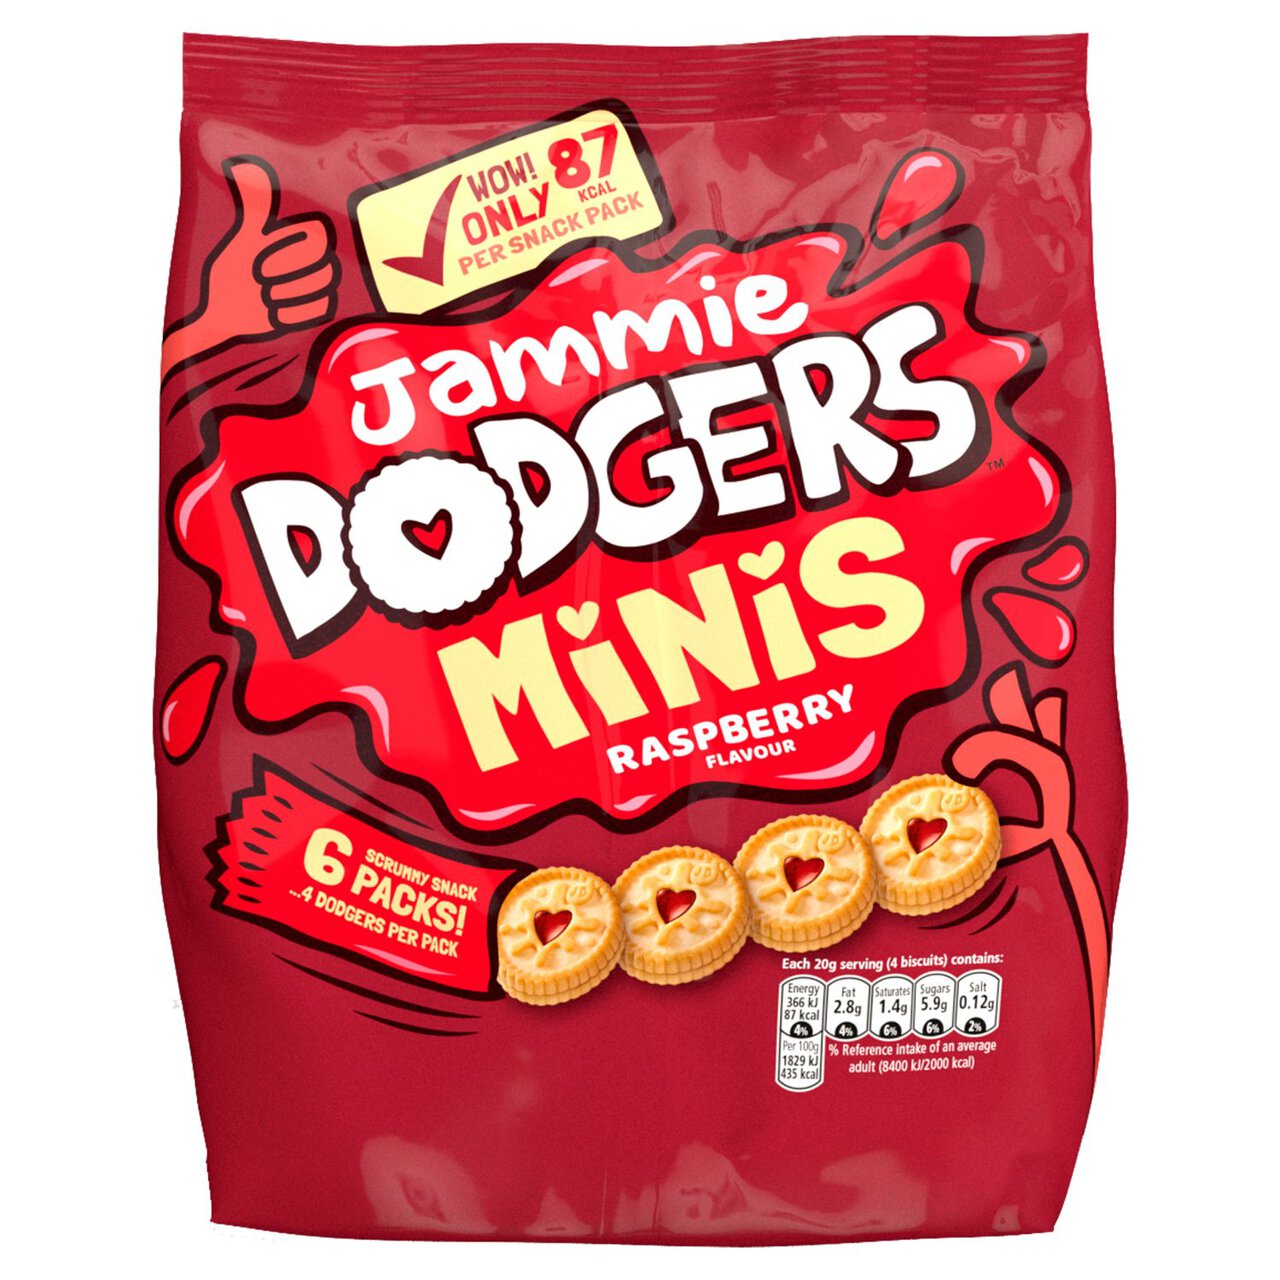 Jammie Dodgers Biscuits Minis 6 pack 6 x 20g